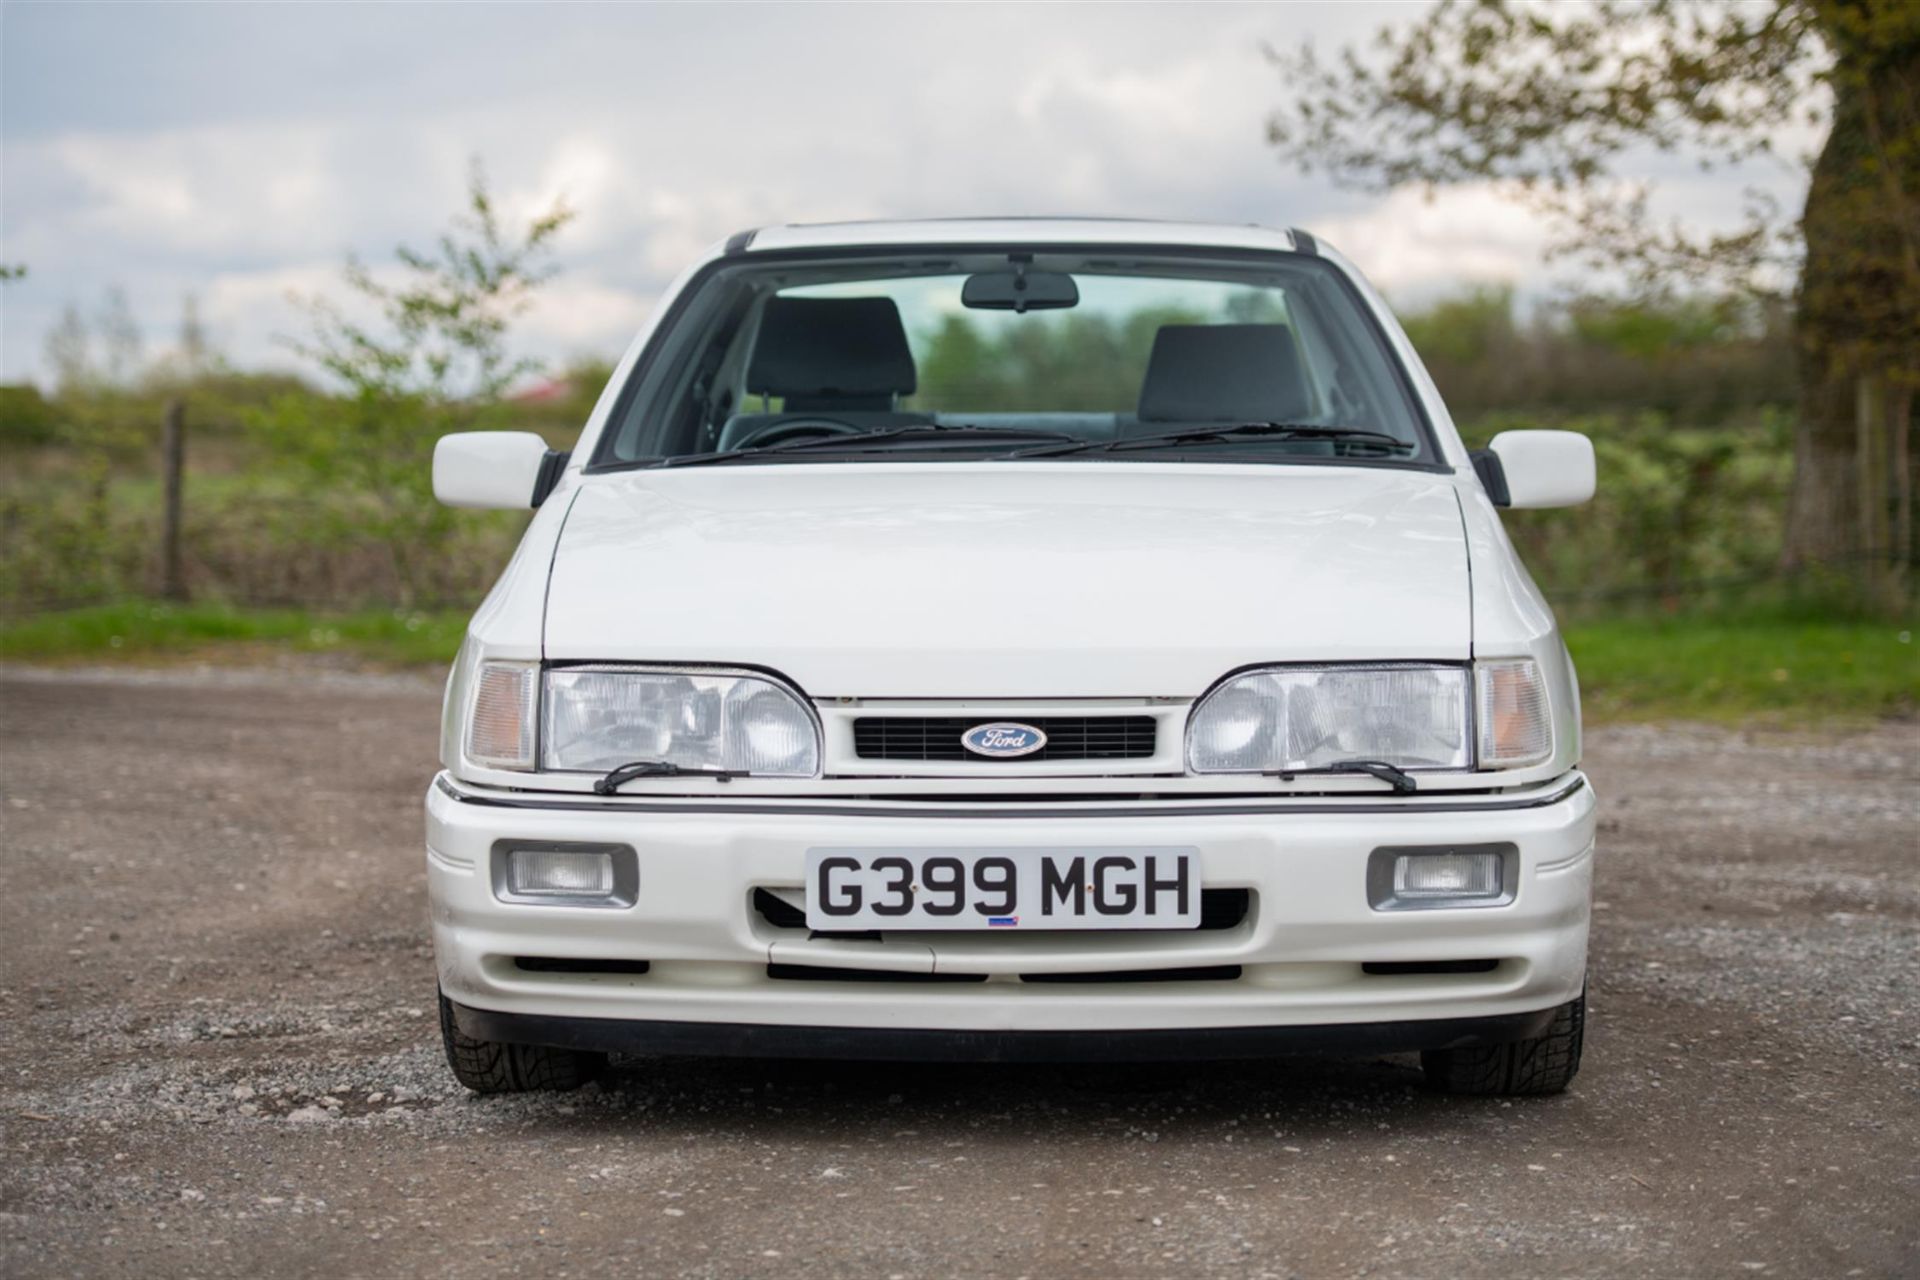 1989 Ford Sierra Sapphire RS Cosworth (2WD) - Image 6 of 10